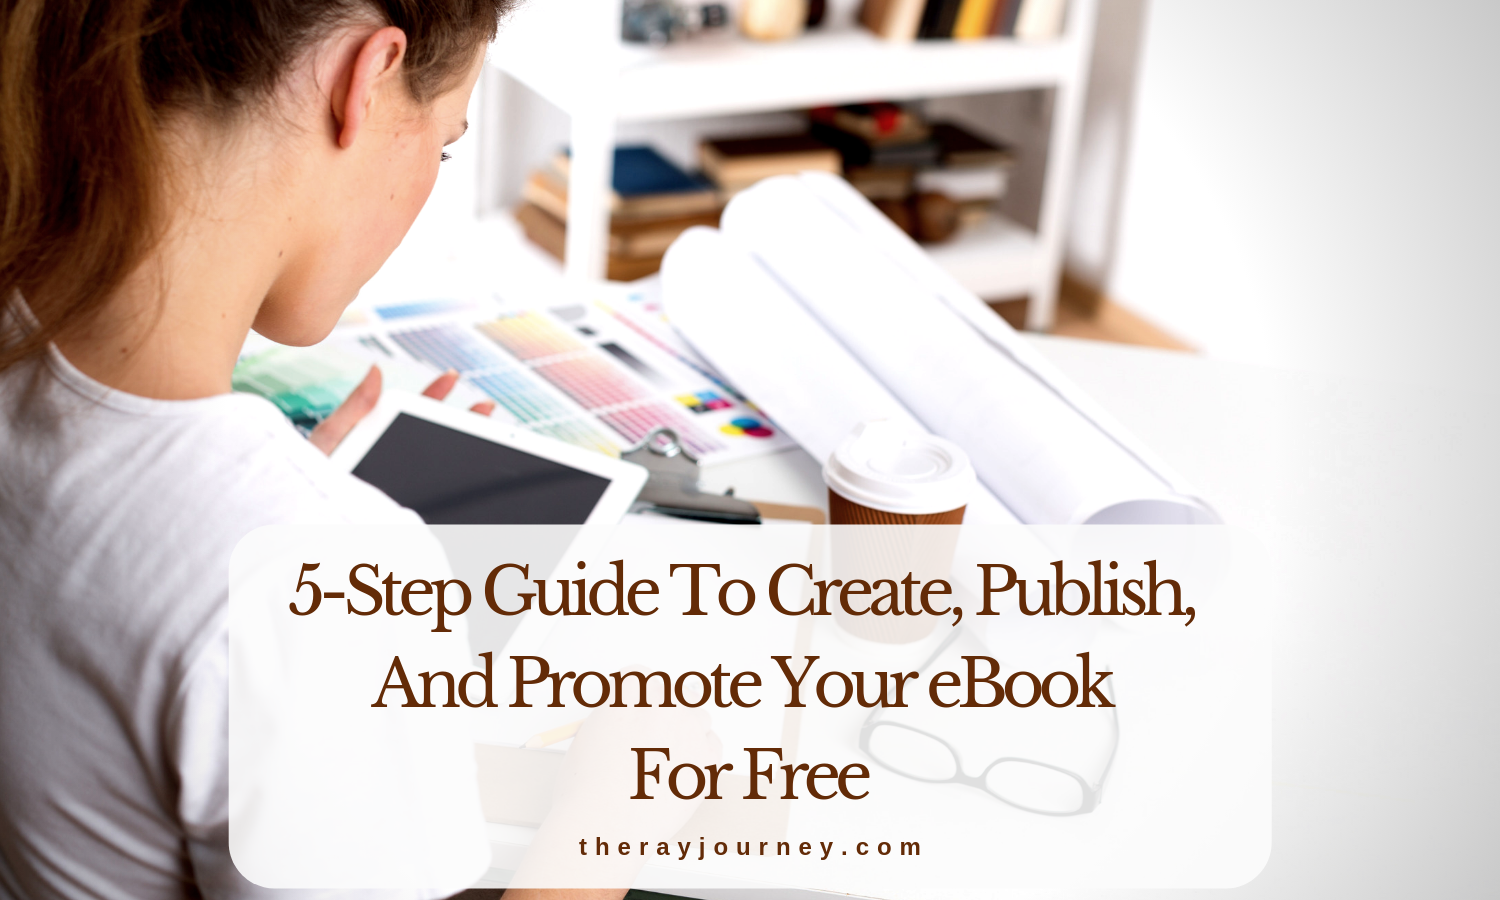 For Writers And Bloggers: A 5-Step Guide To Create, Publish, And Promote Your eBook FOR FREE